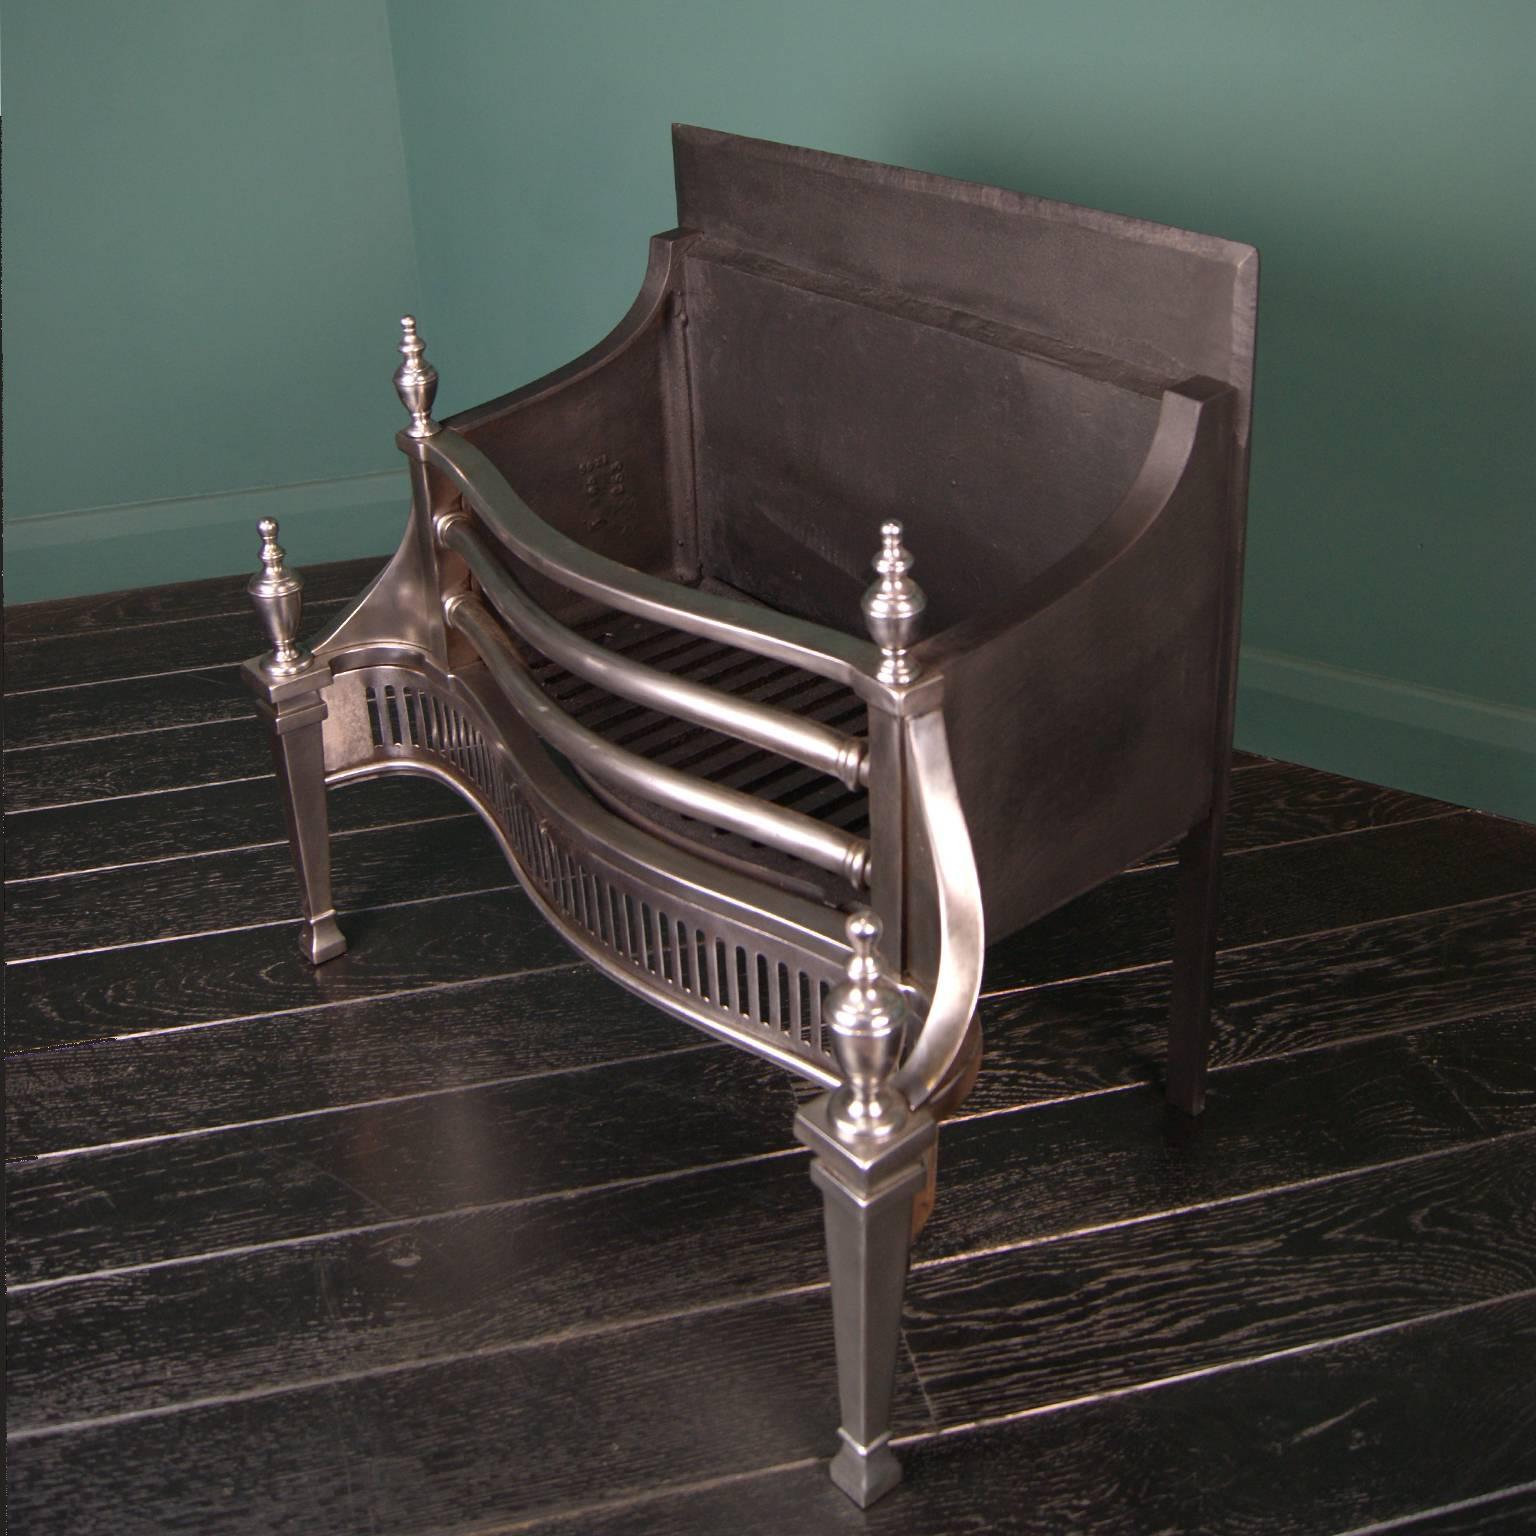 A polished steel dog grate from the Carron Company with pierced fluted fret and steel moulding, urn finials and tapered legs. A construction based on the designs of Robert Adam.